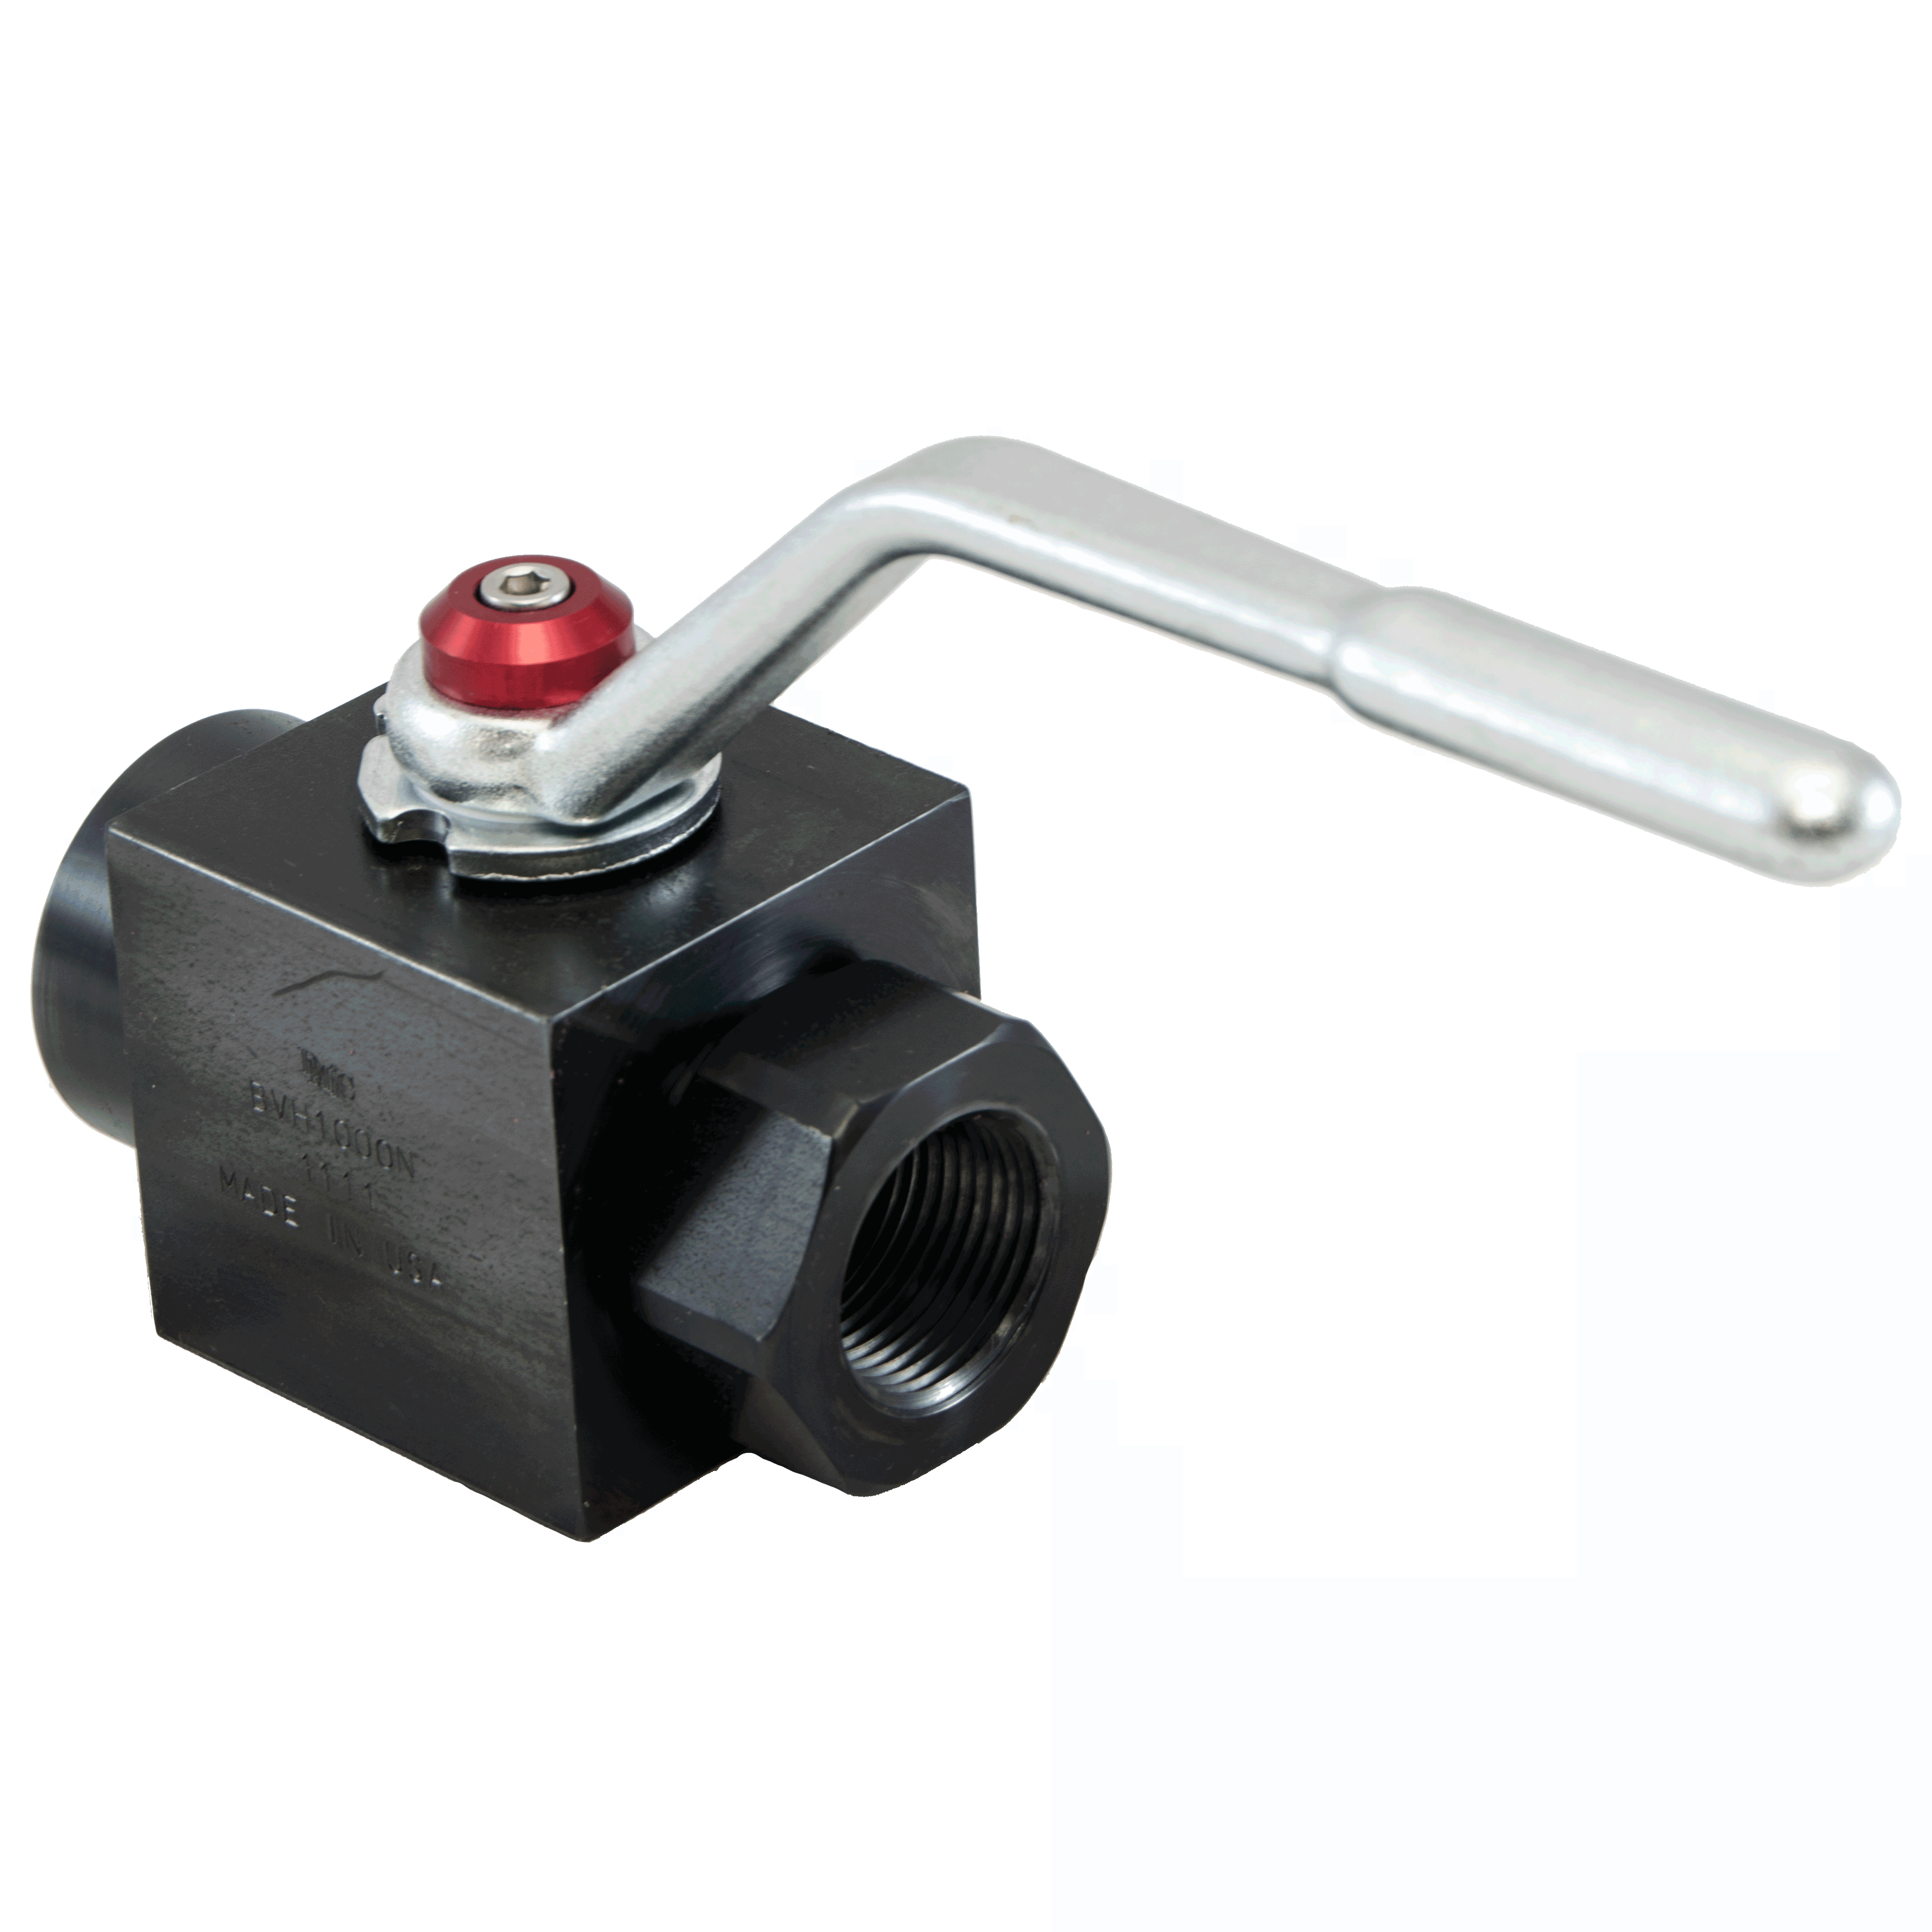 BVH-0250N-1111 : DMIC Square Body Ball Valve, 1/4 NPT, Carbon Steel, 7500psi, Two-Way